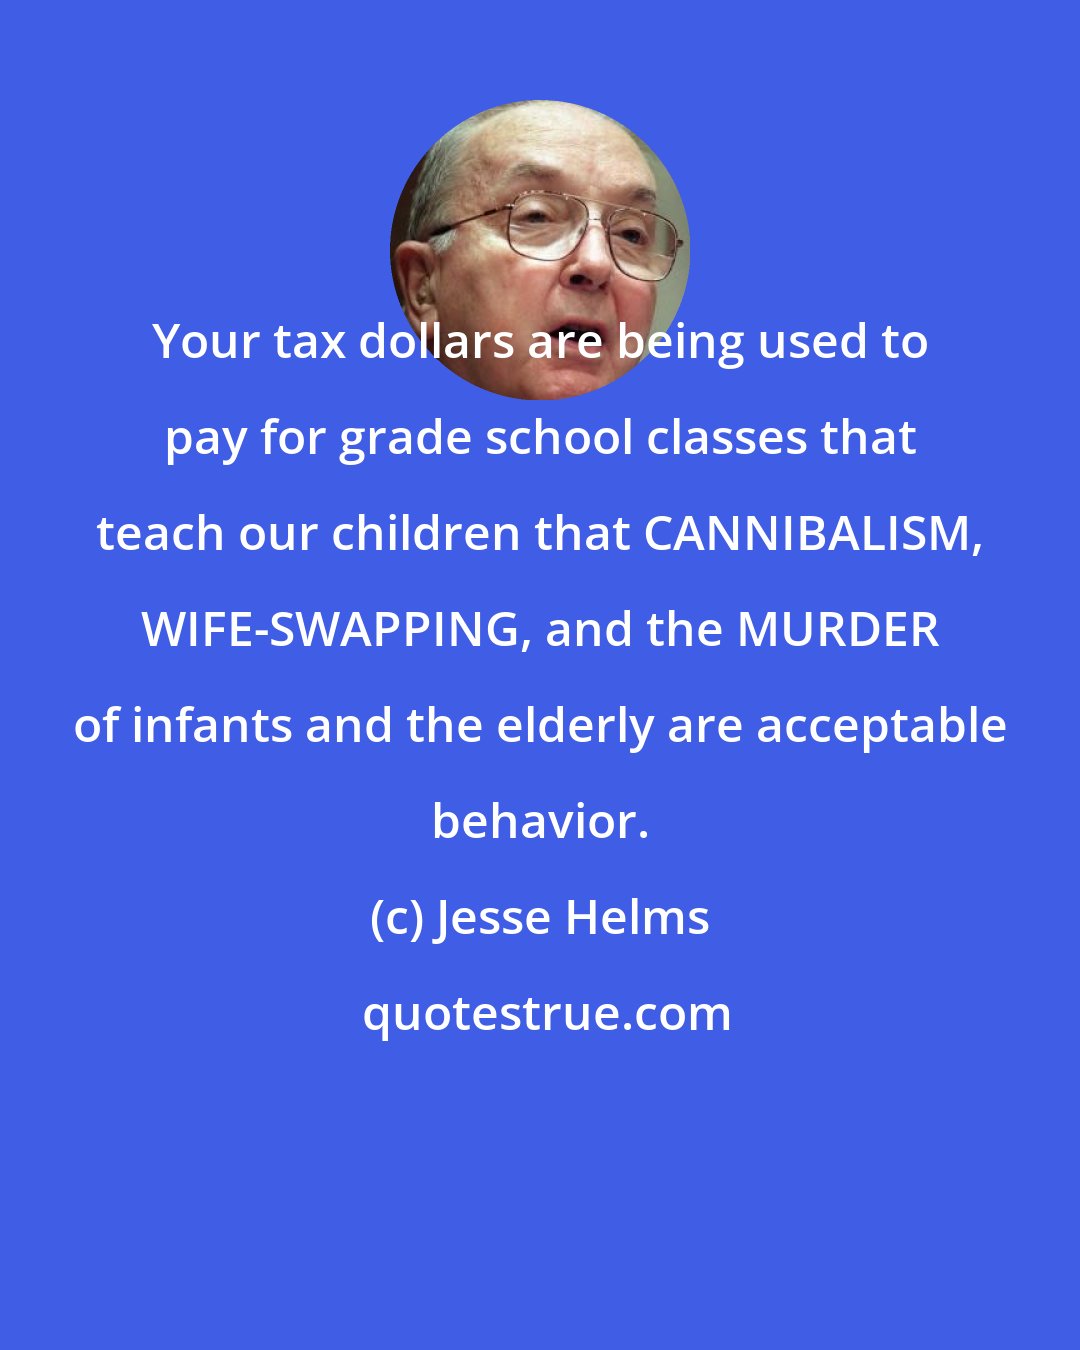 Jesse Helms: Your tax dollars are being used to pay for grade school classes that teach our children that CANNIBALISM, WIFE-SWAPPING, and the MURDER of infants and the elderly are acceptable behavior.